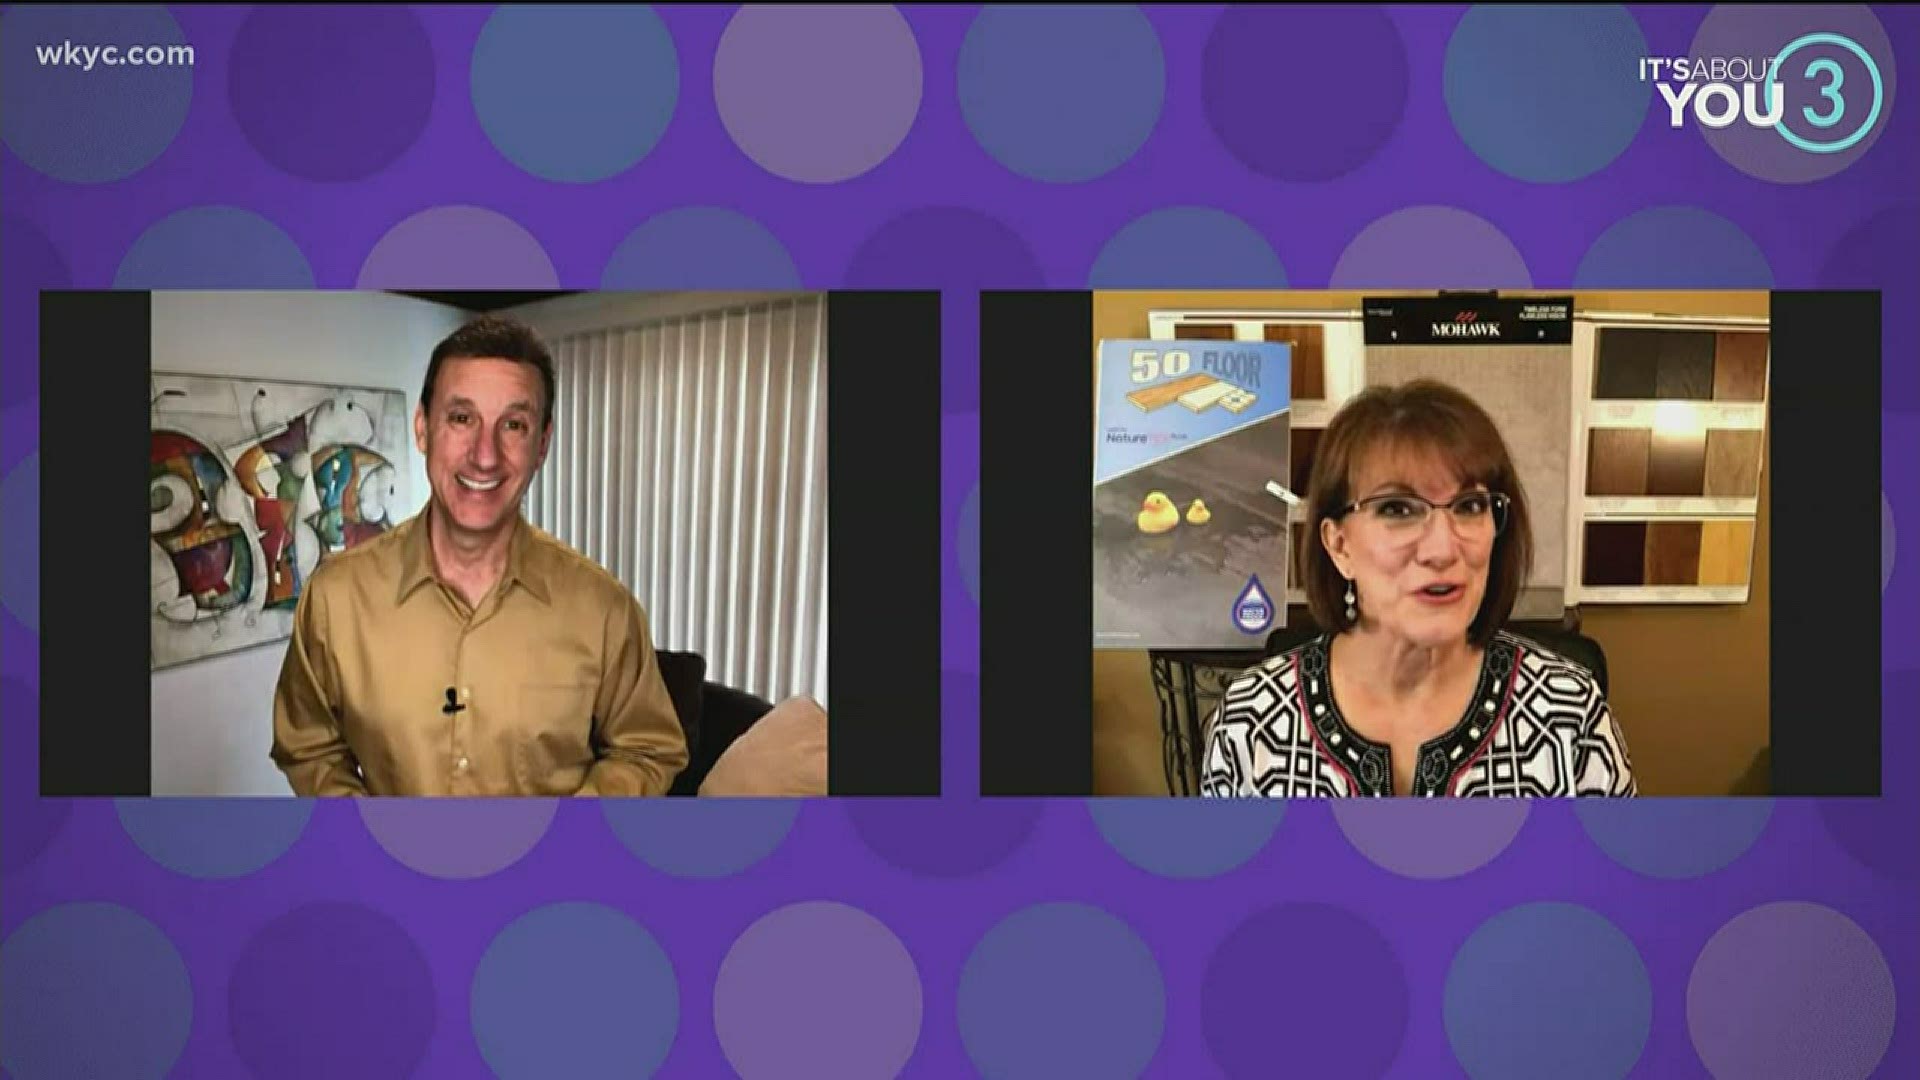 Joe and our good friend Judy talk 50 Floor and their free installation offer along with safe, in-home viewings so you can see exactly what your floor will look like.